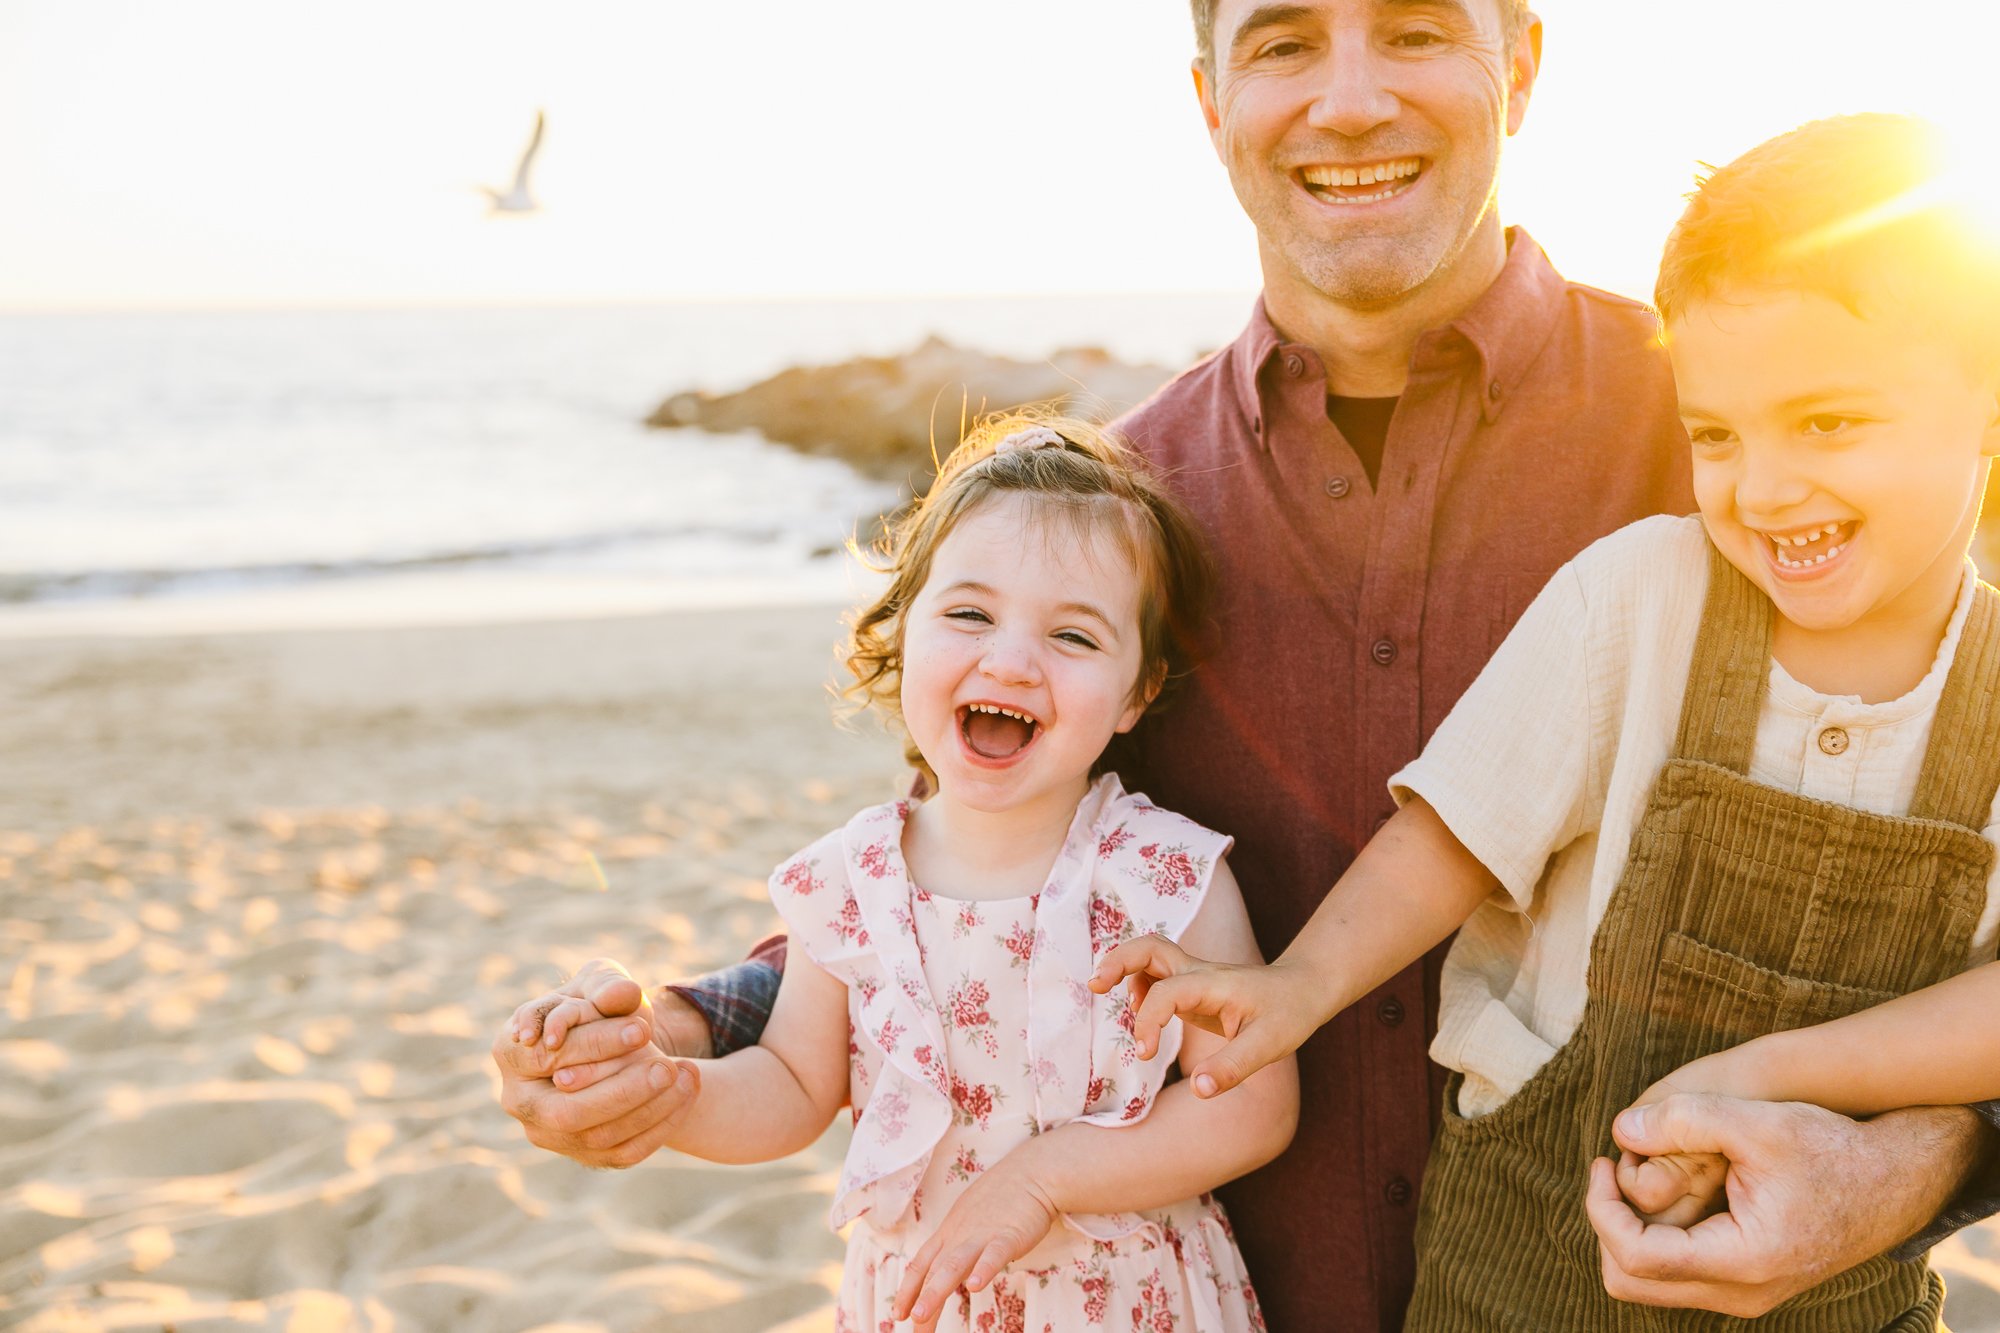 Los_Angeles_Family_Photographer_Mini_session_Golden_hour_Beach_Kid_Maternity_baby_Children_Holiday_Photography-2481.jpg